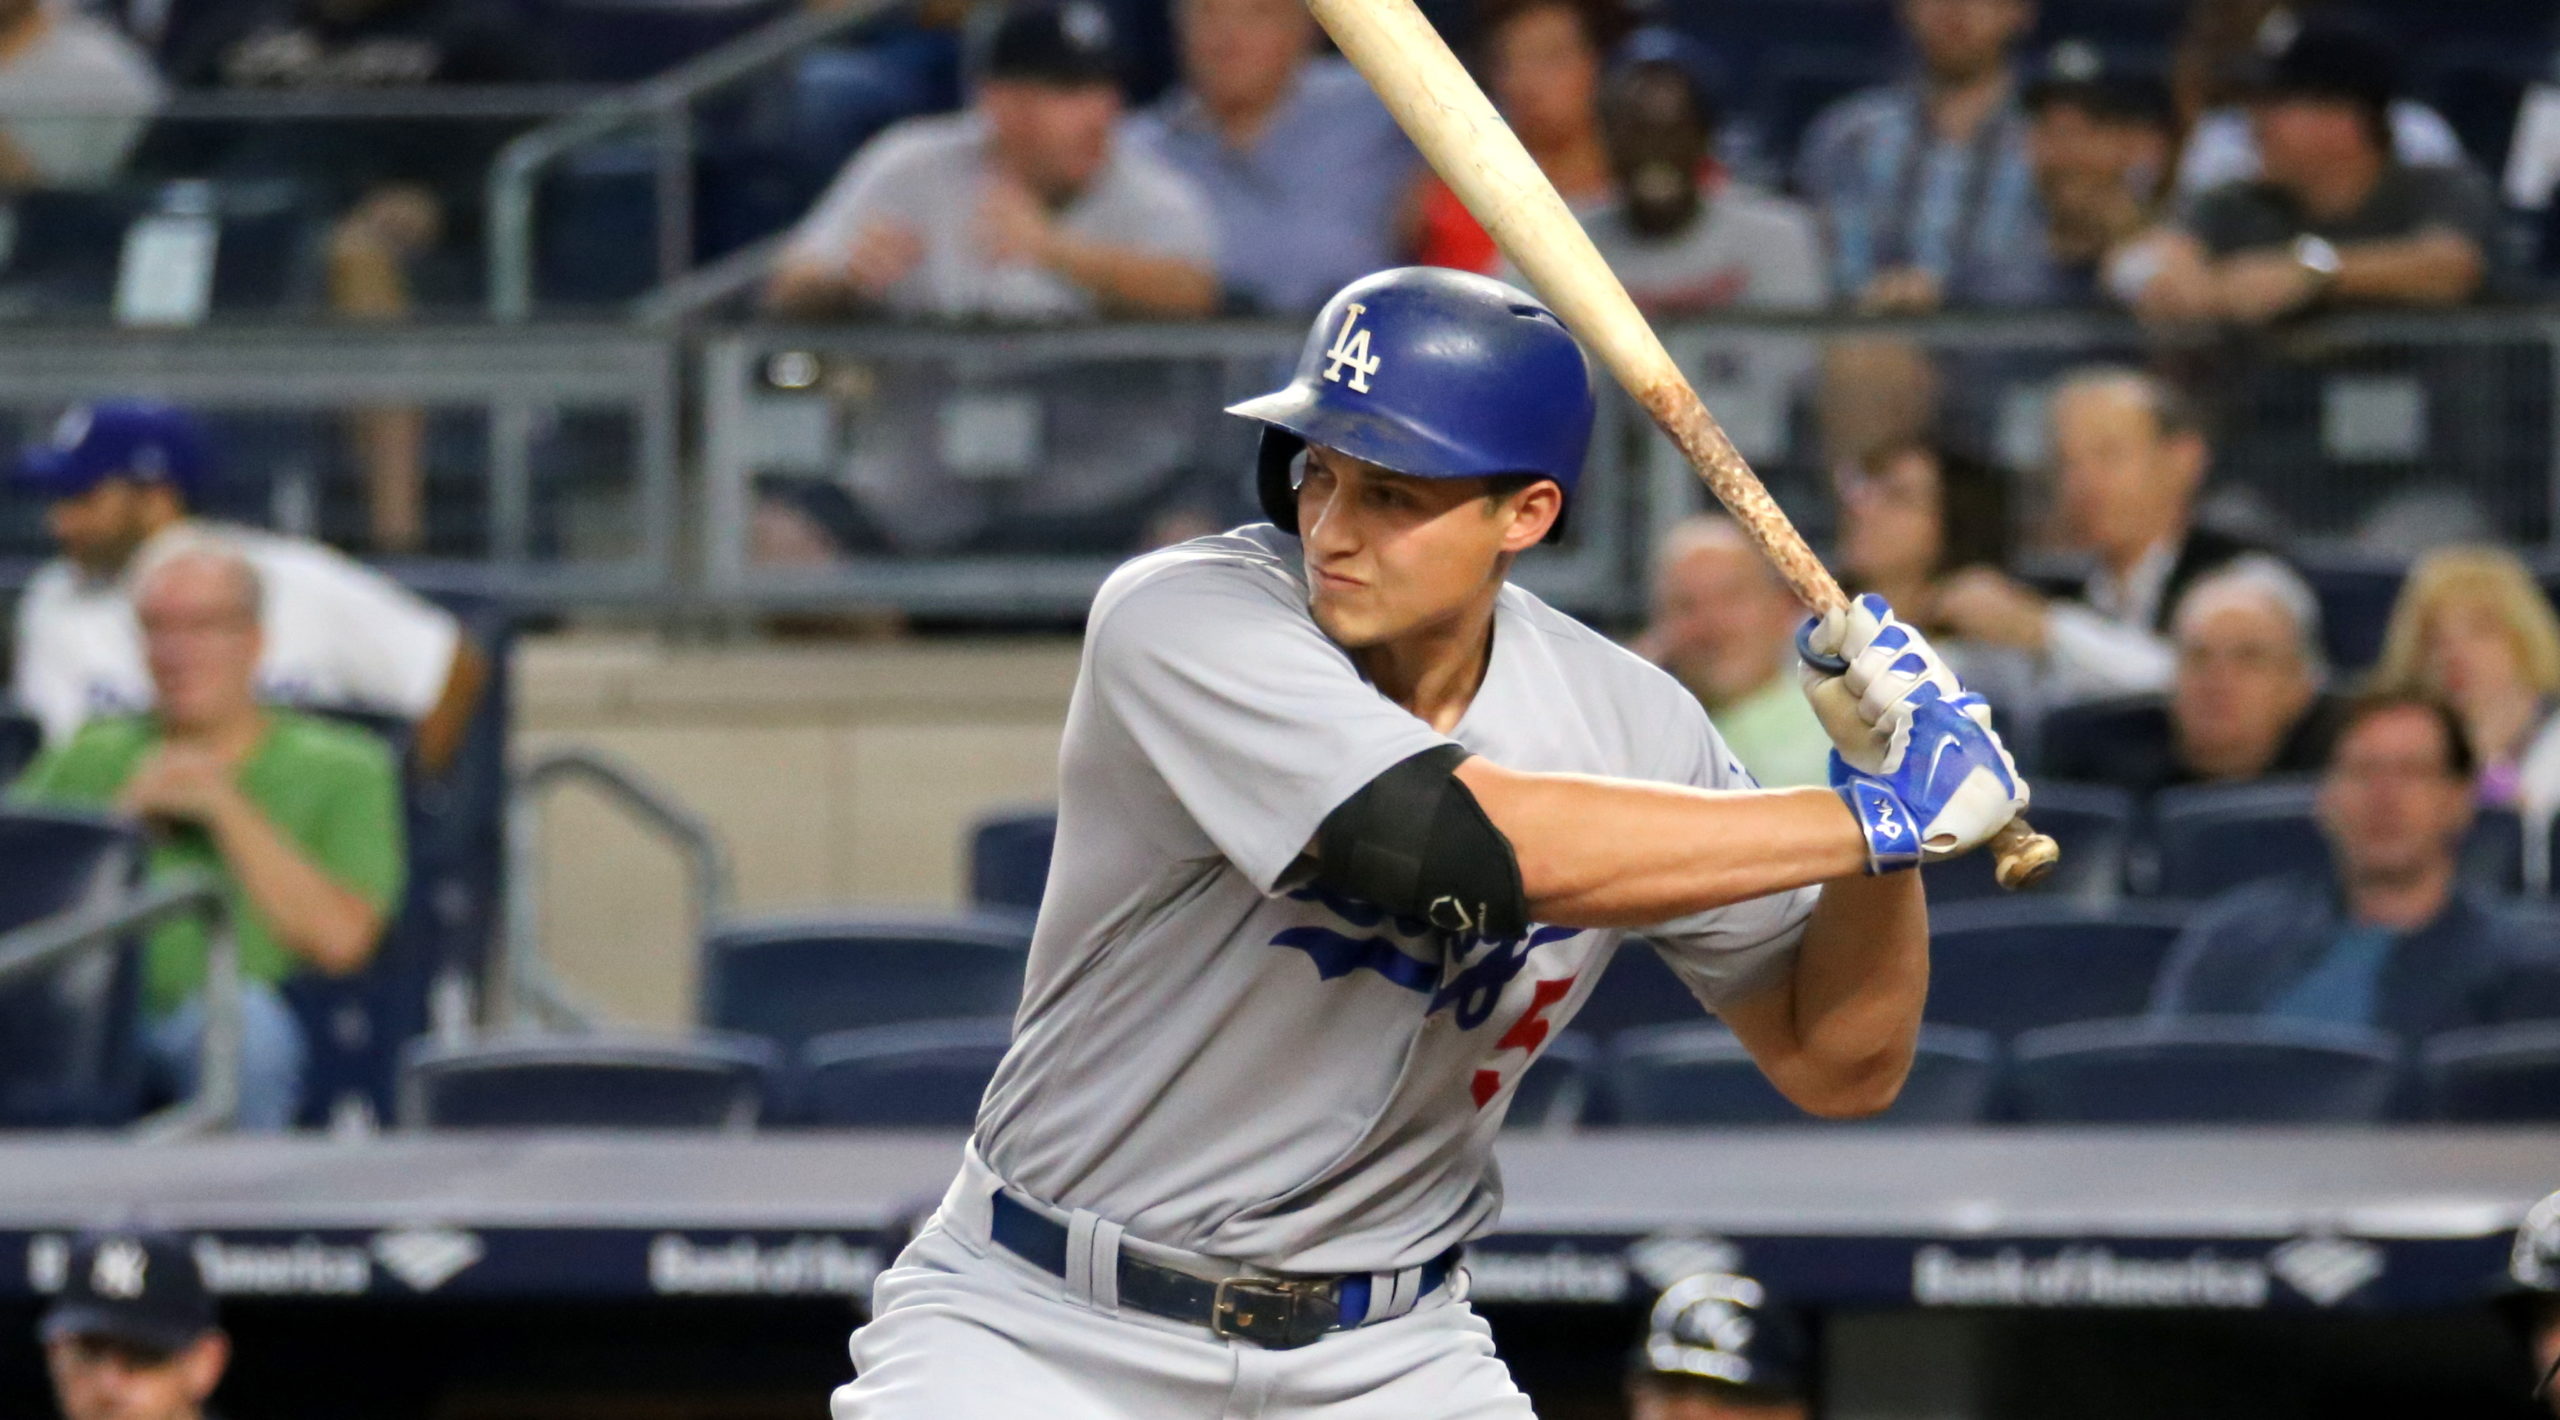 5 Fun Facts About Corey Seager